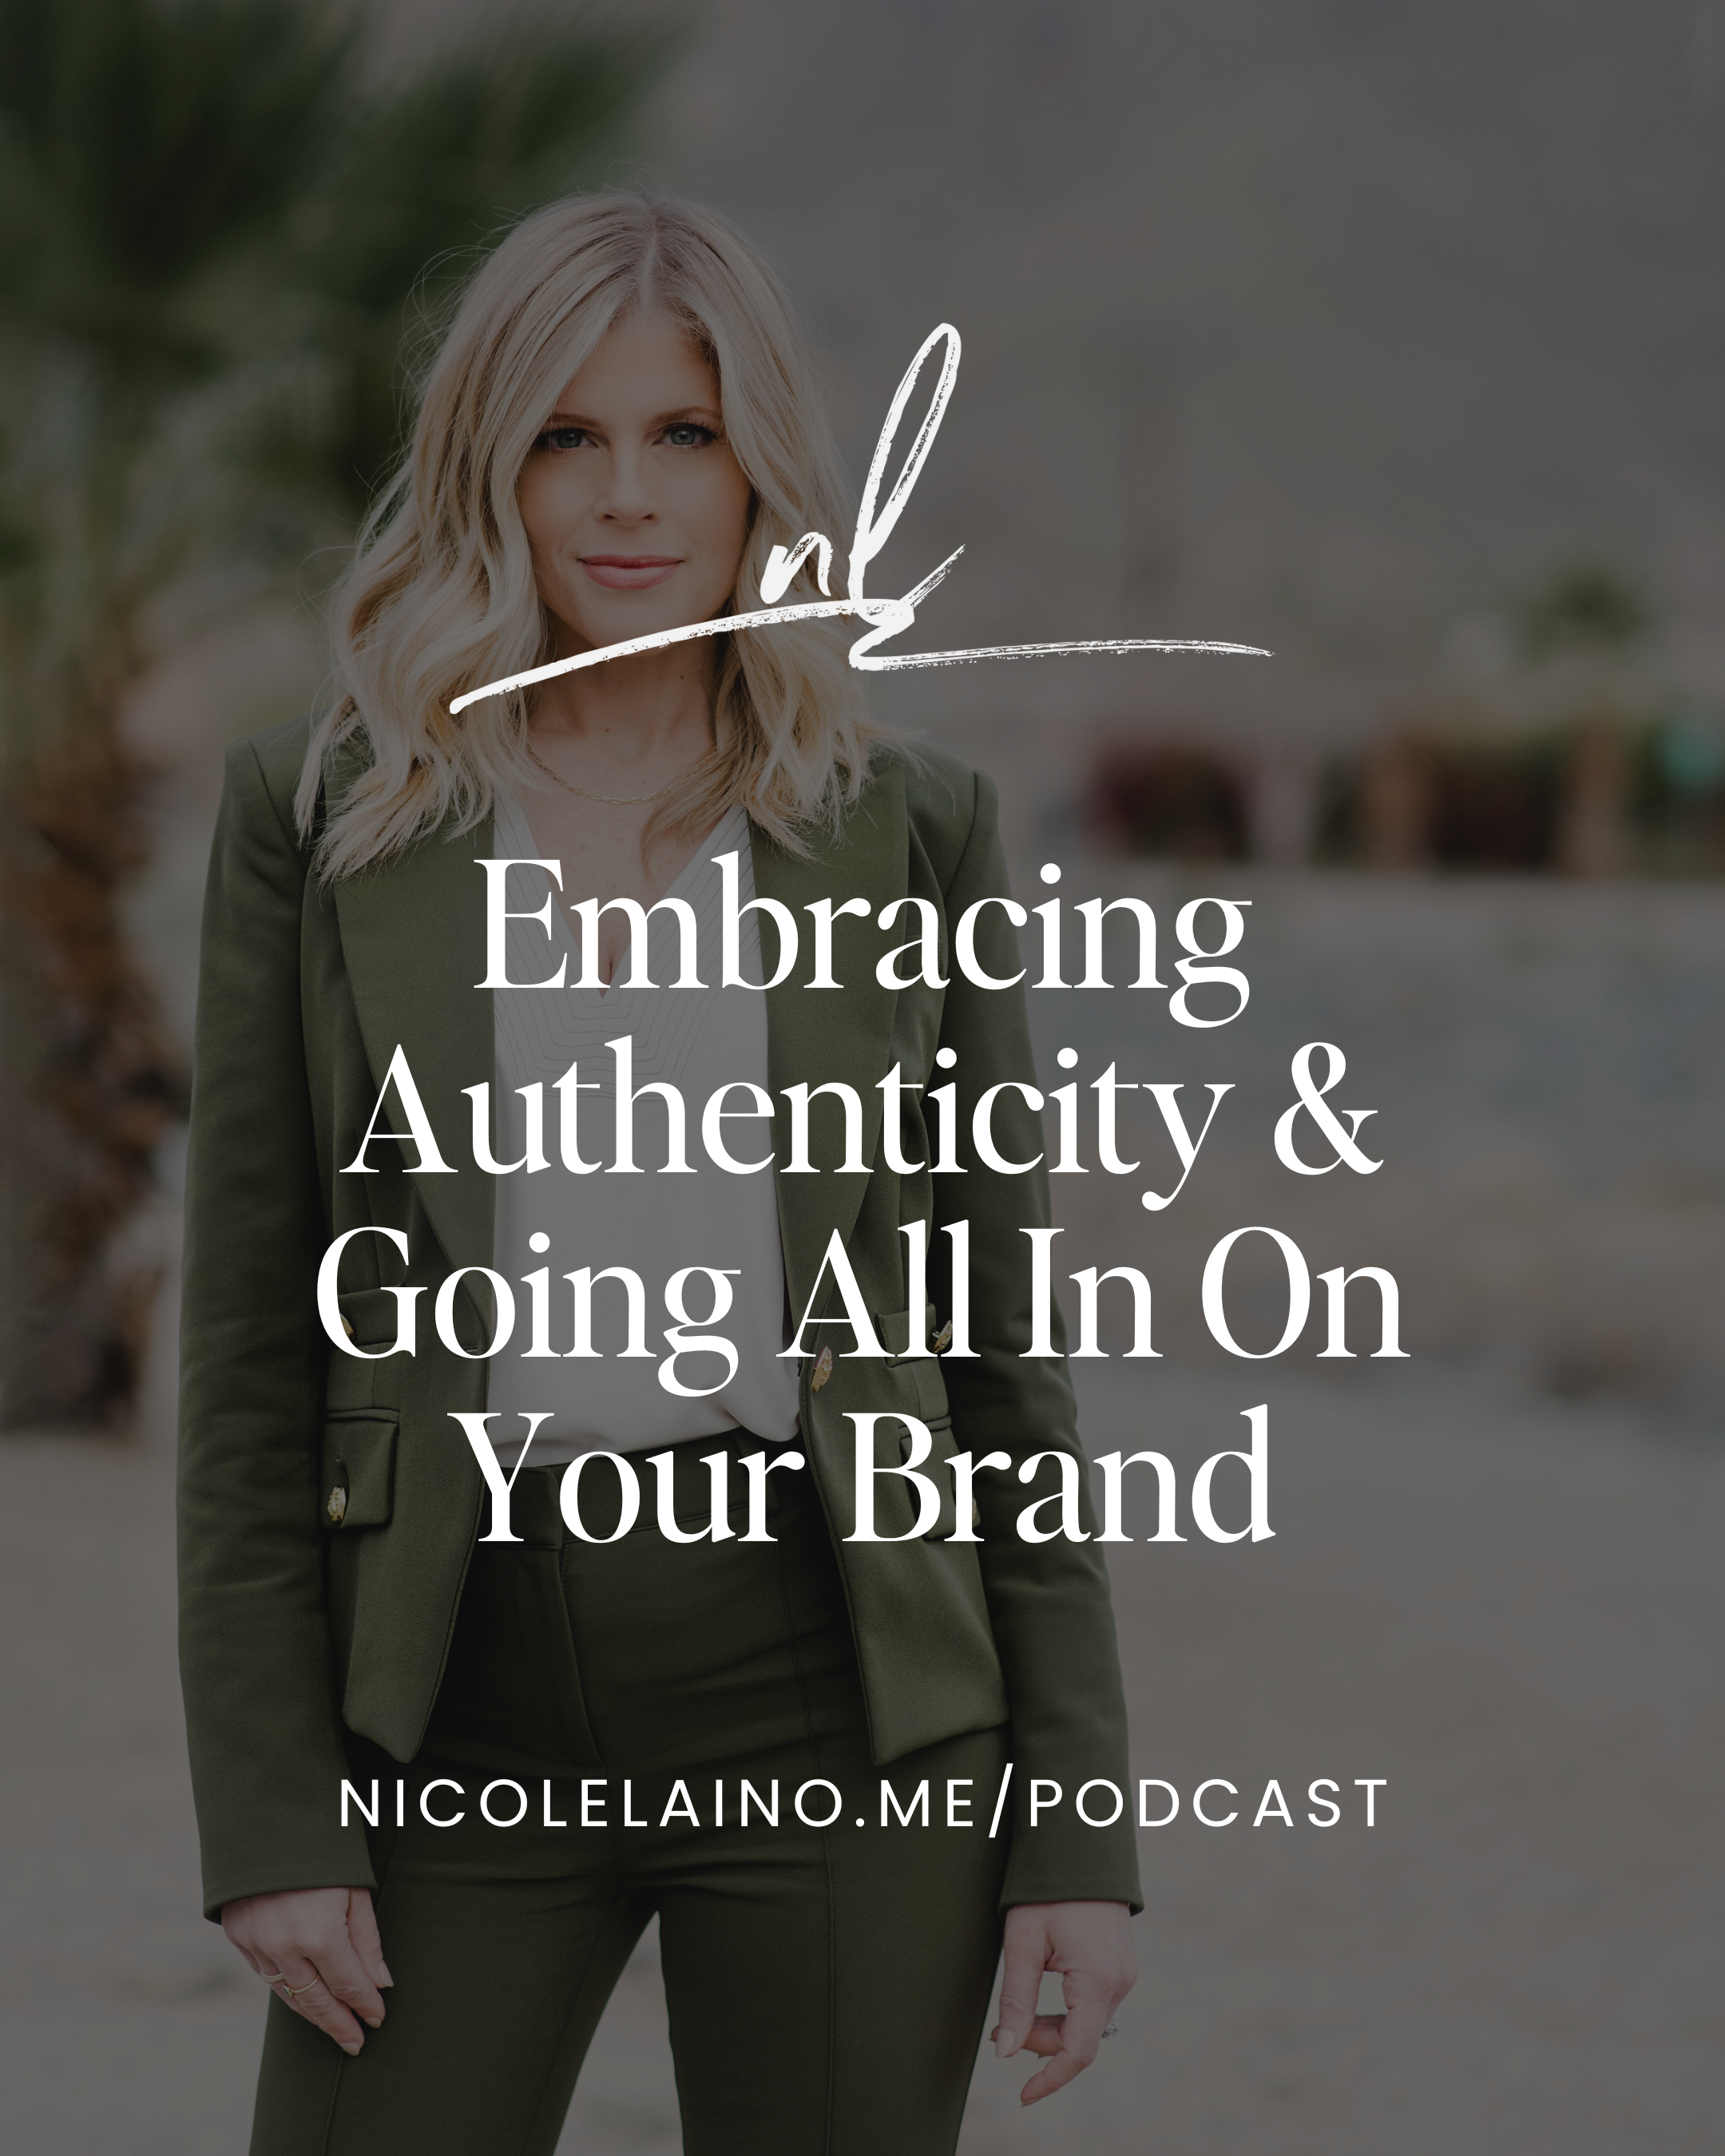 Embracing Authenticity & Going All In On Your Brand with 6/2 Sacral Manifesting Generator Ati Grinspun